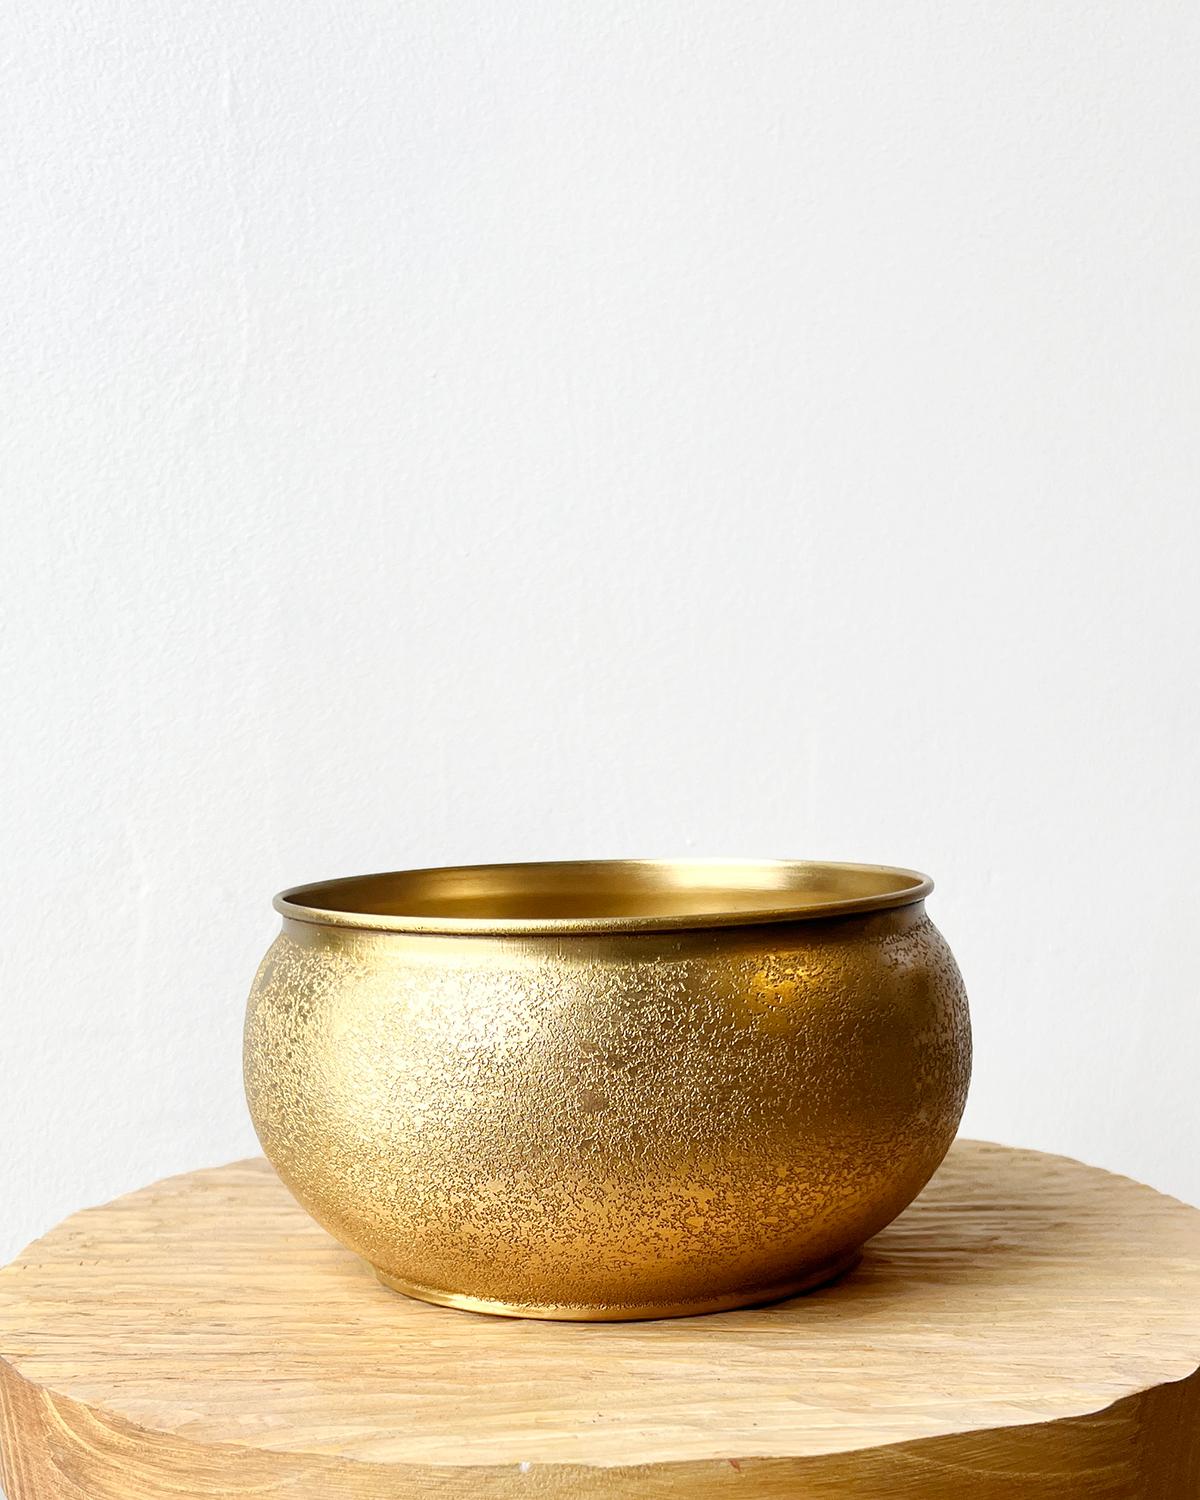 A bronze bowl to brighten your home
The Puco Textured Bowl is the perfect blend of modern and Traditional Design. Crafted from bronze with an intricate texture, this eye-catching bowl suits any home style, from rustic to boho to glam. Use it as a